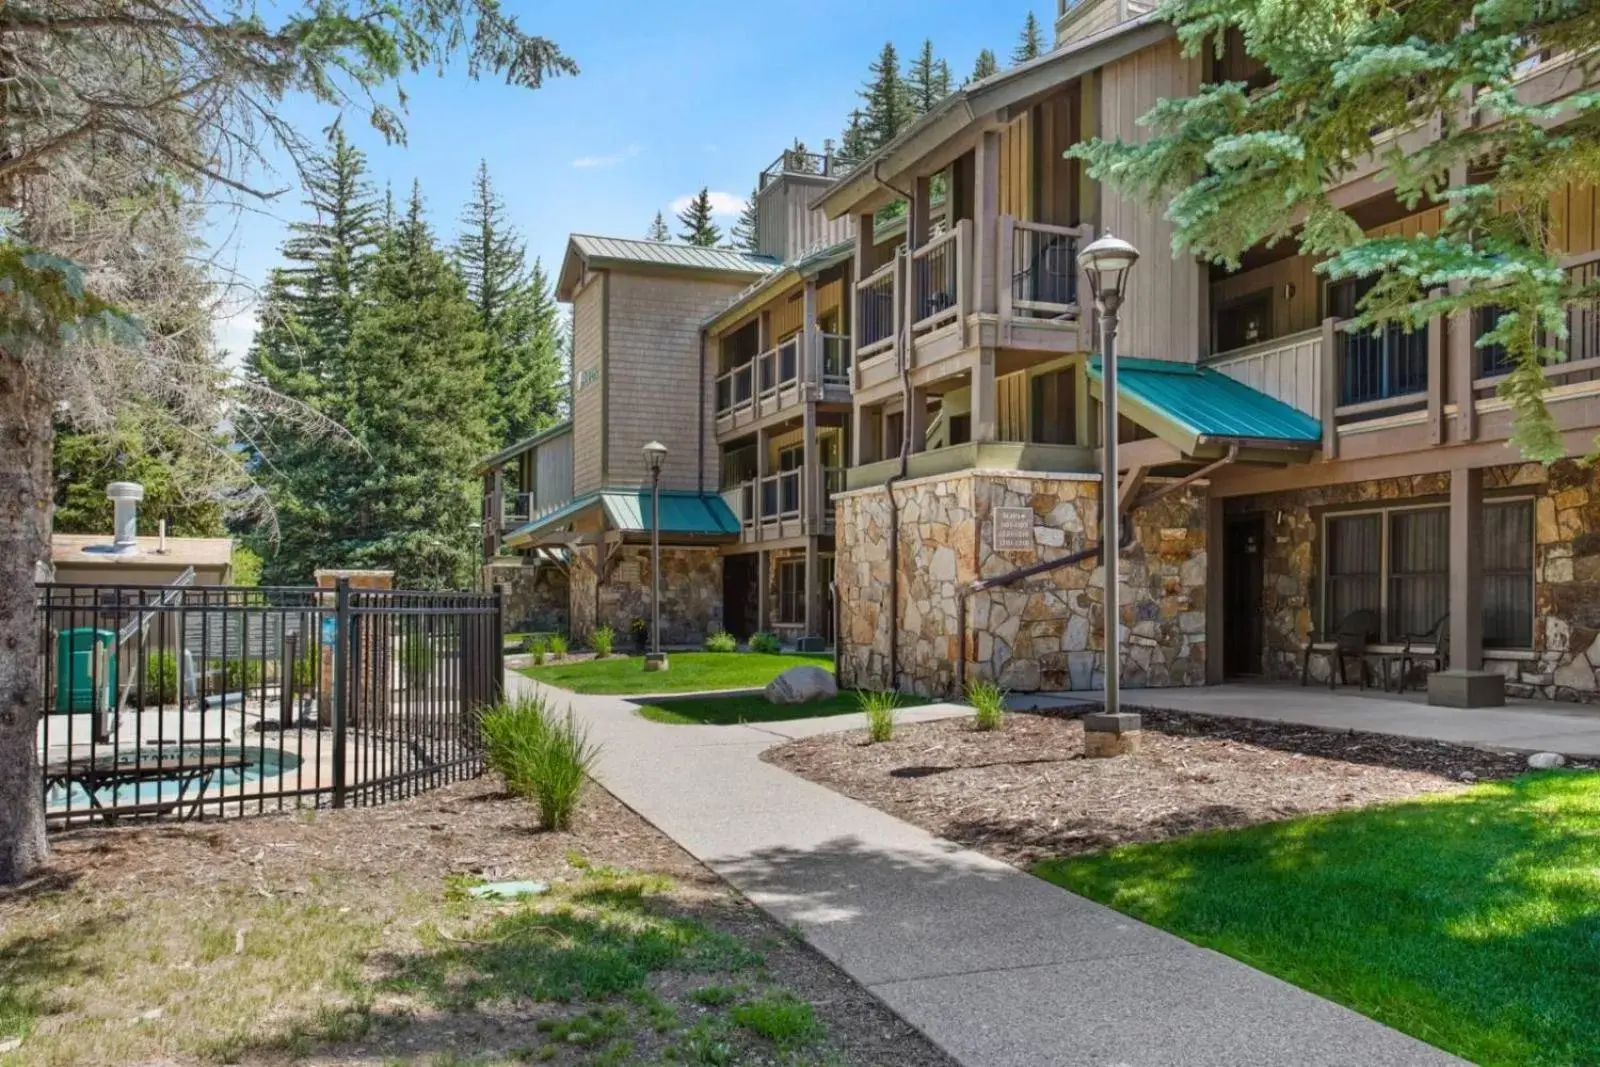 Property Building in Bluegreen's StreamSide at Vail